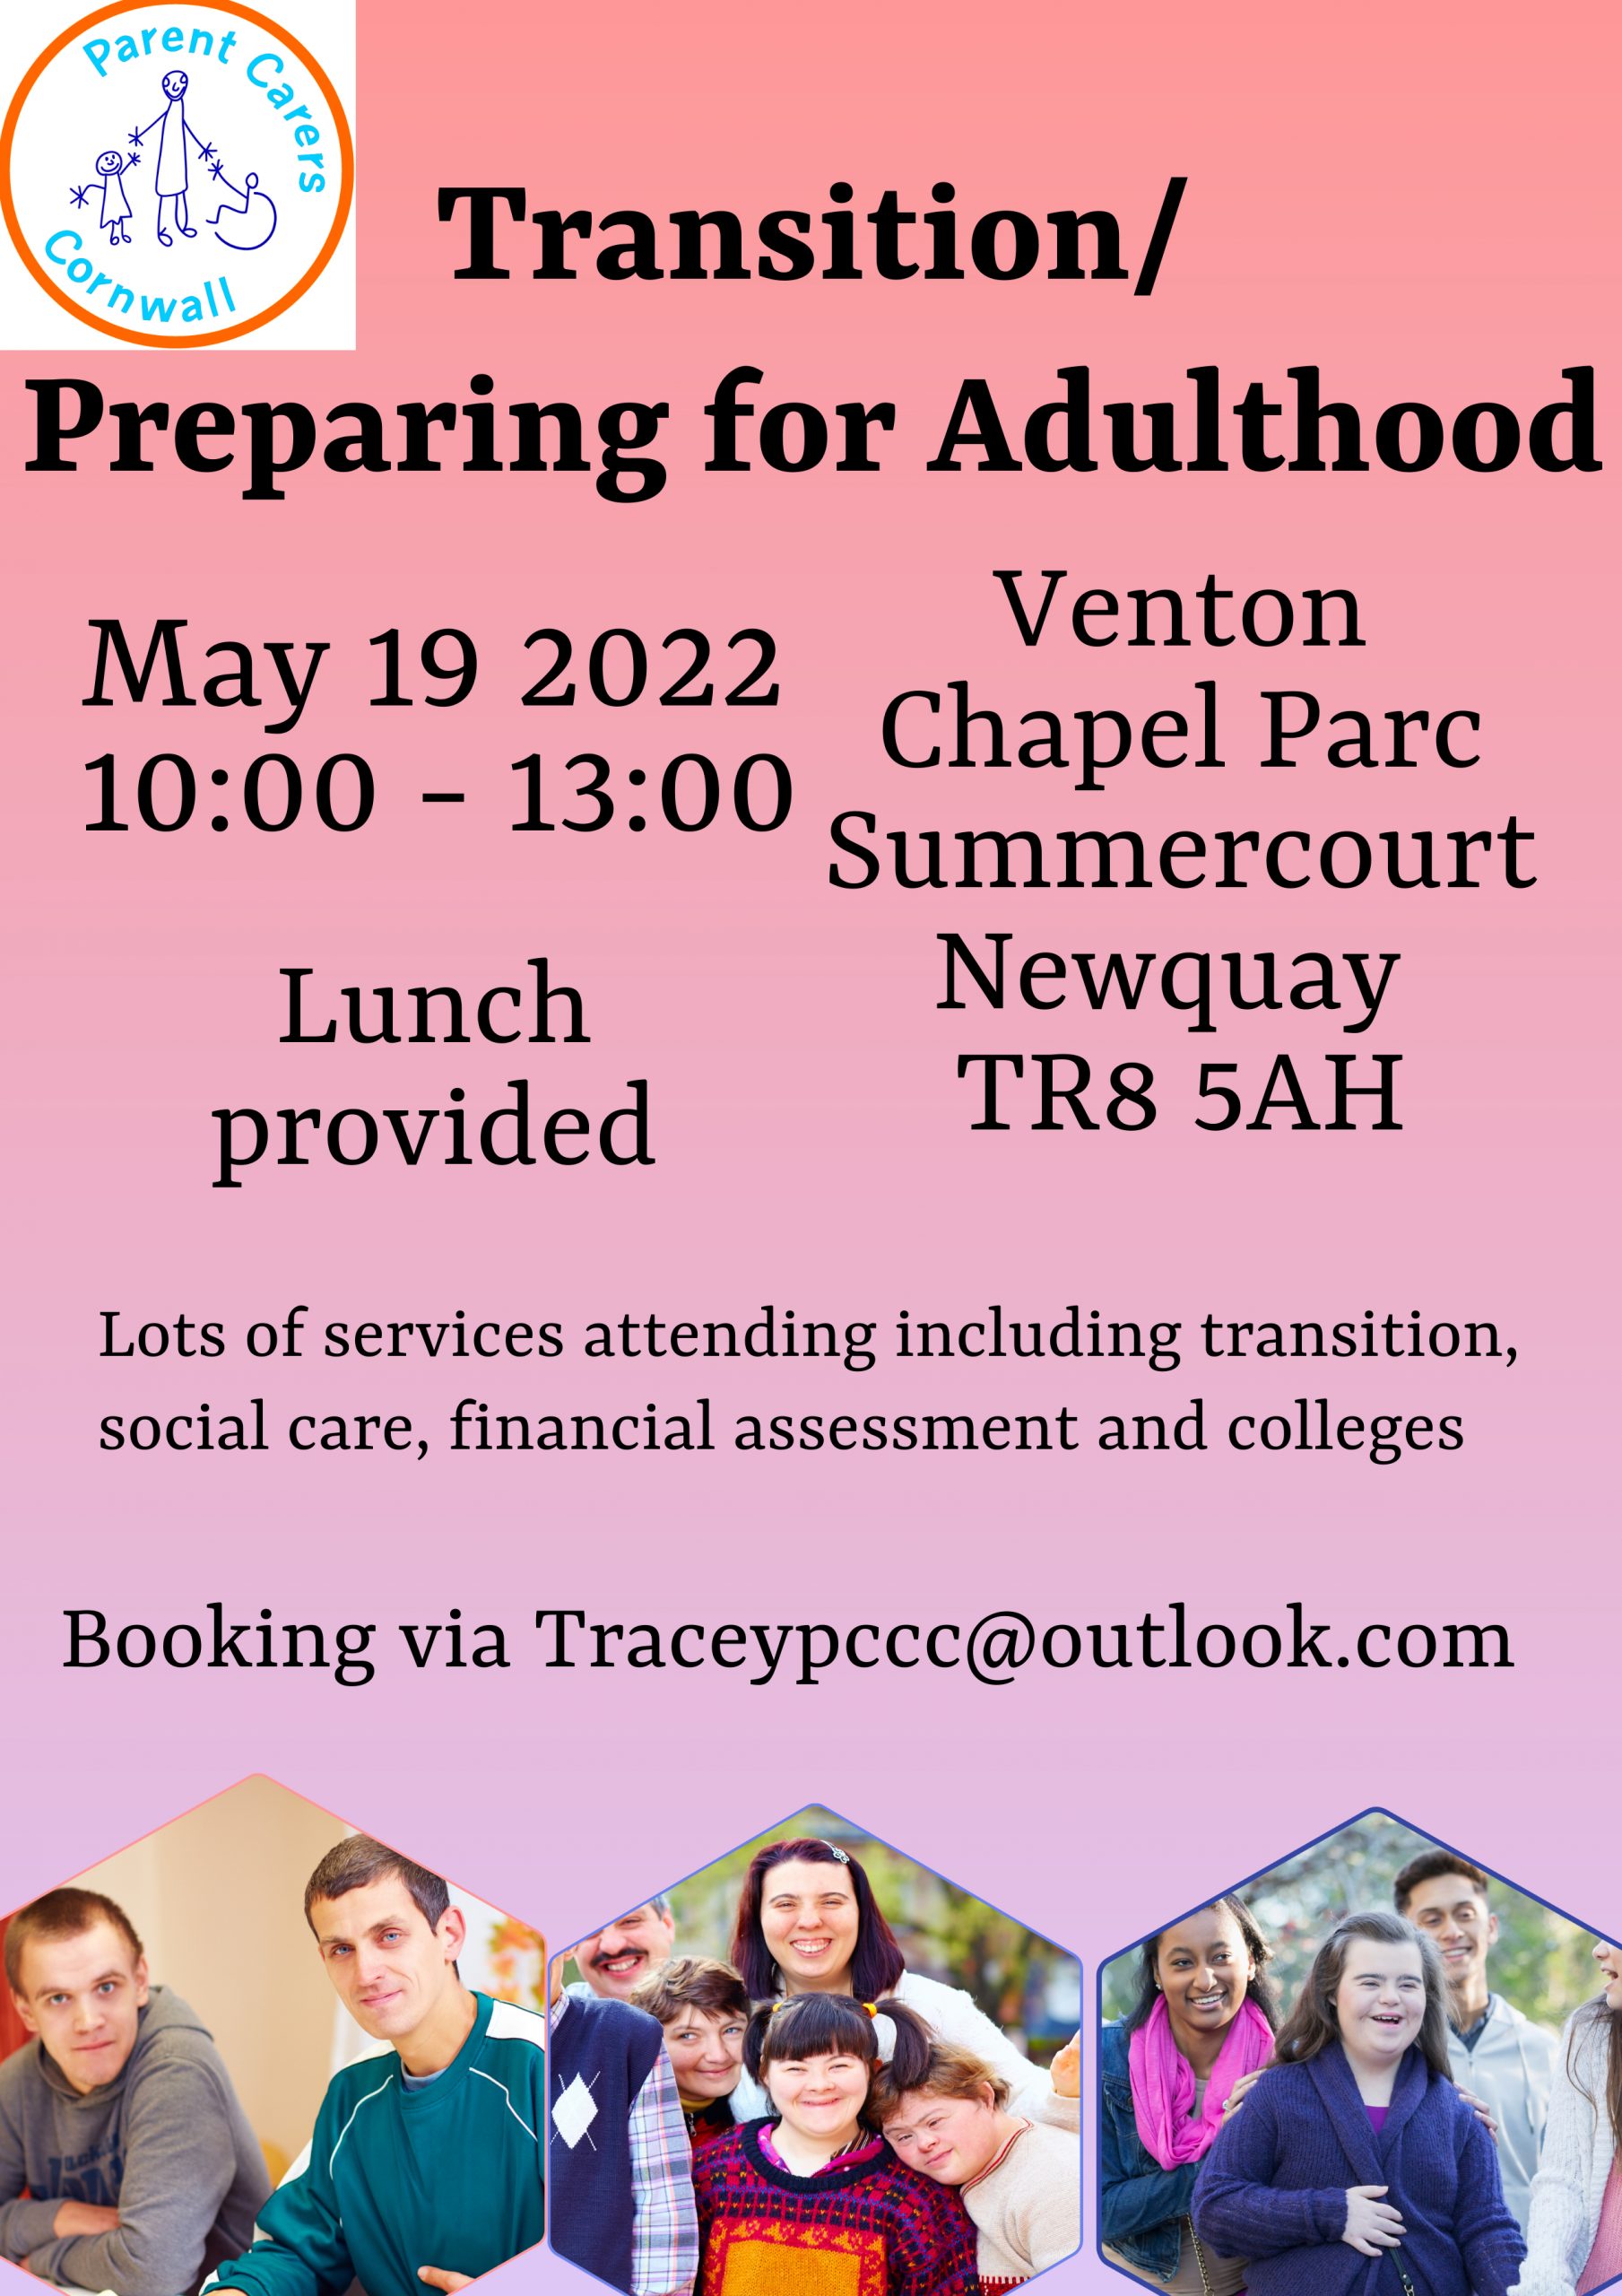 Transition and Preparing for Adulthood – May 19 2022